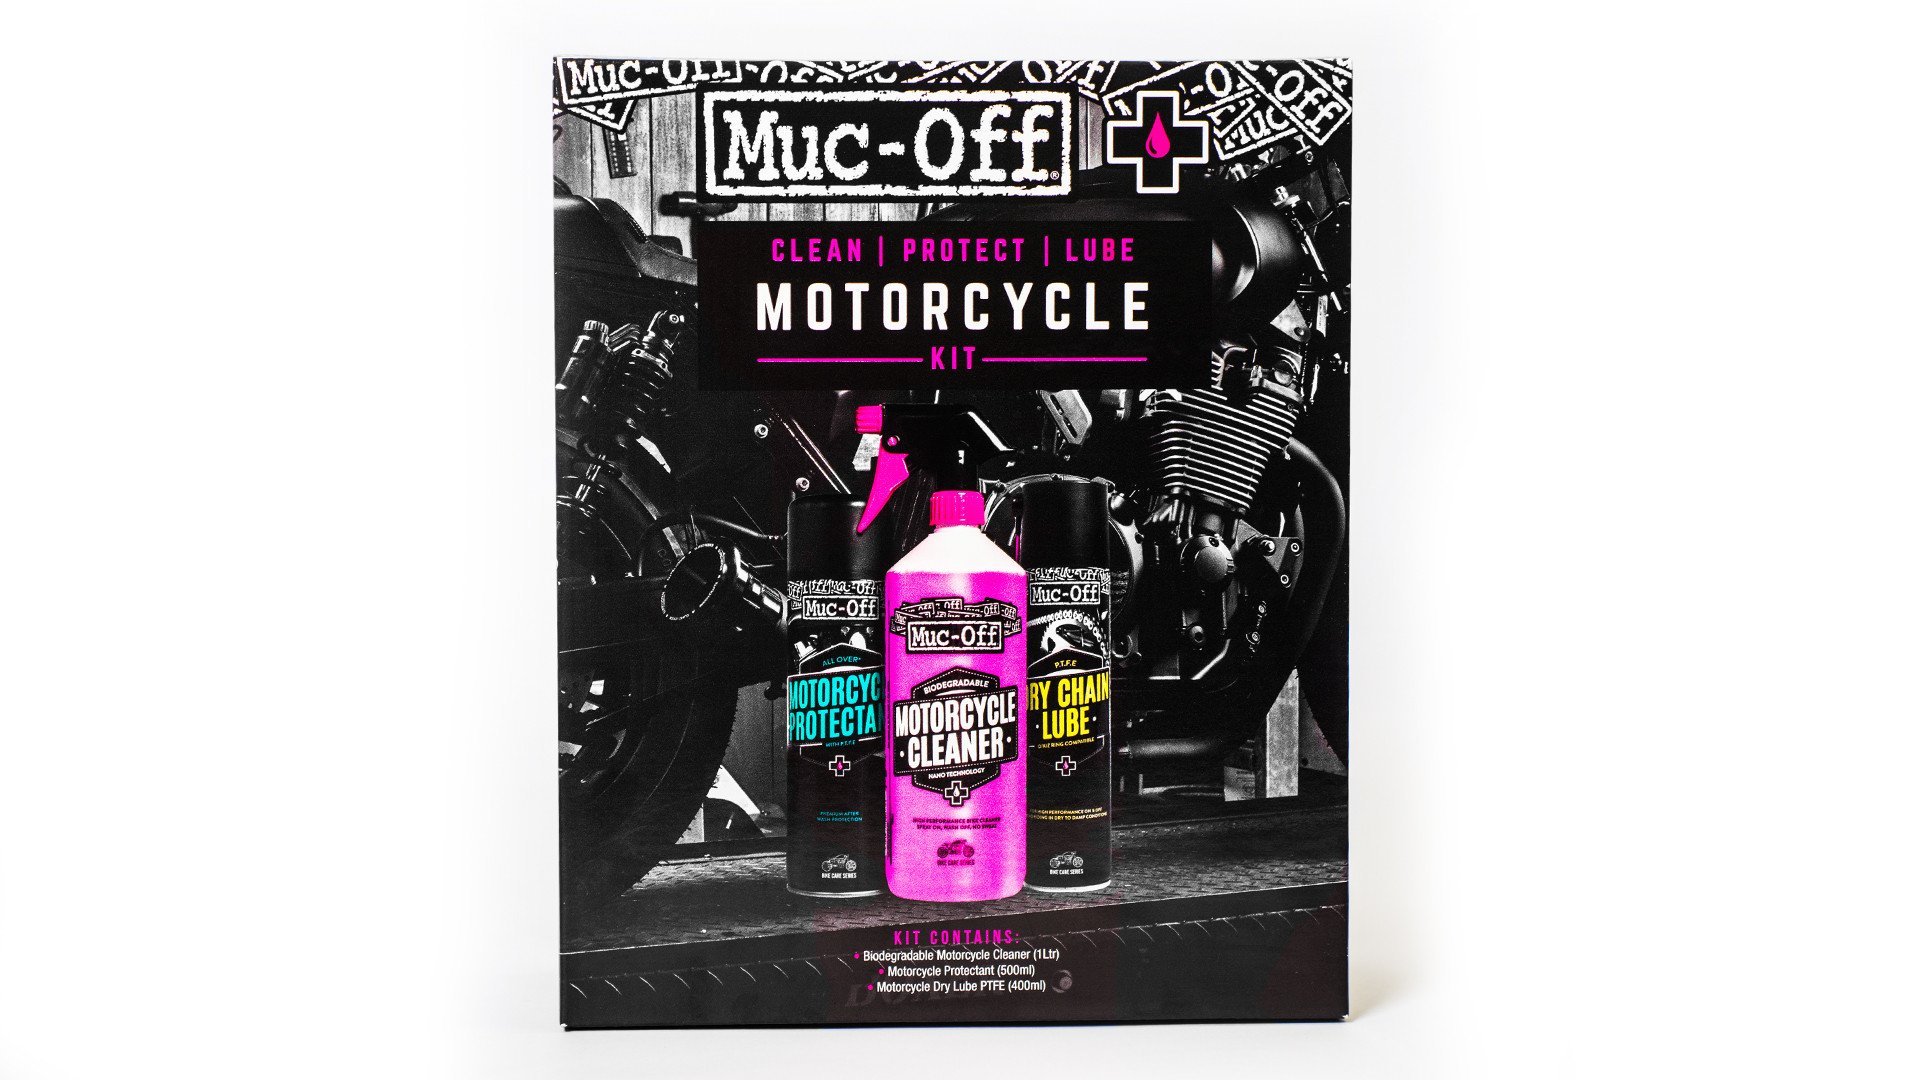 MUC-OFF Clean, Protect & Lube